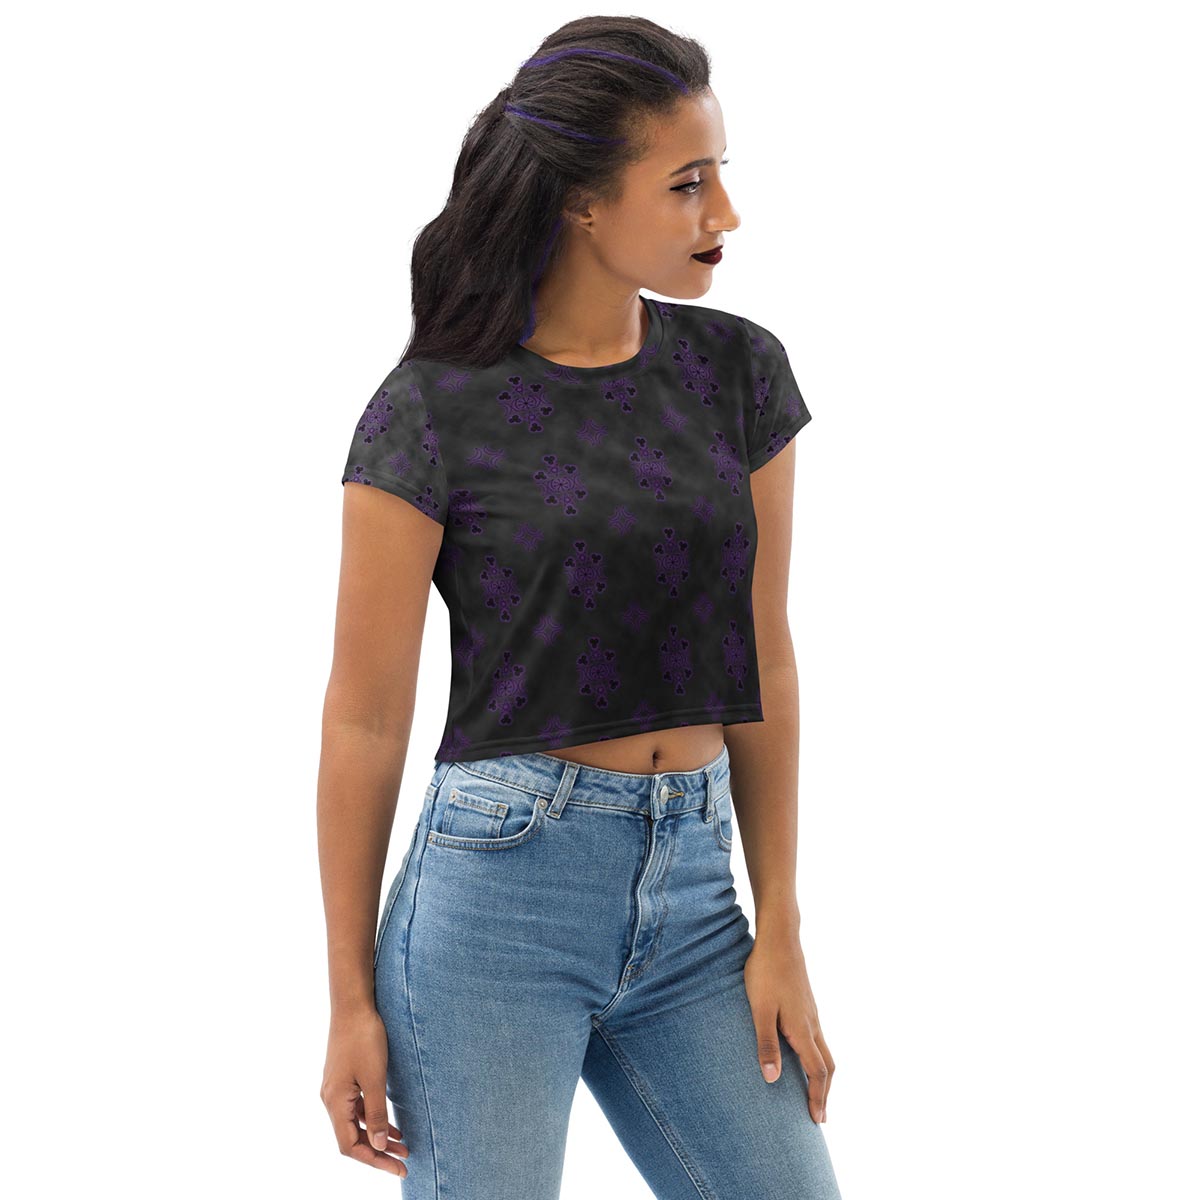 Witchy Ombre Cloudy Crop Tee; Melasdesign; alternative; pagan; gothic; witchy; occult; fashion; top; crop; 